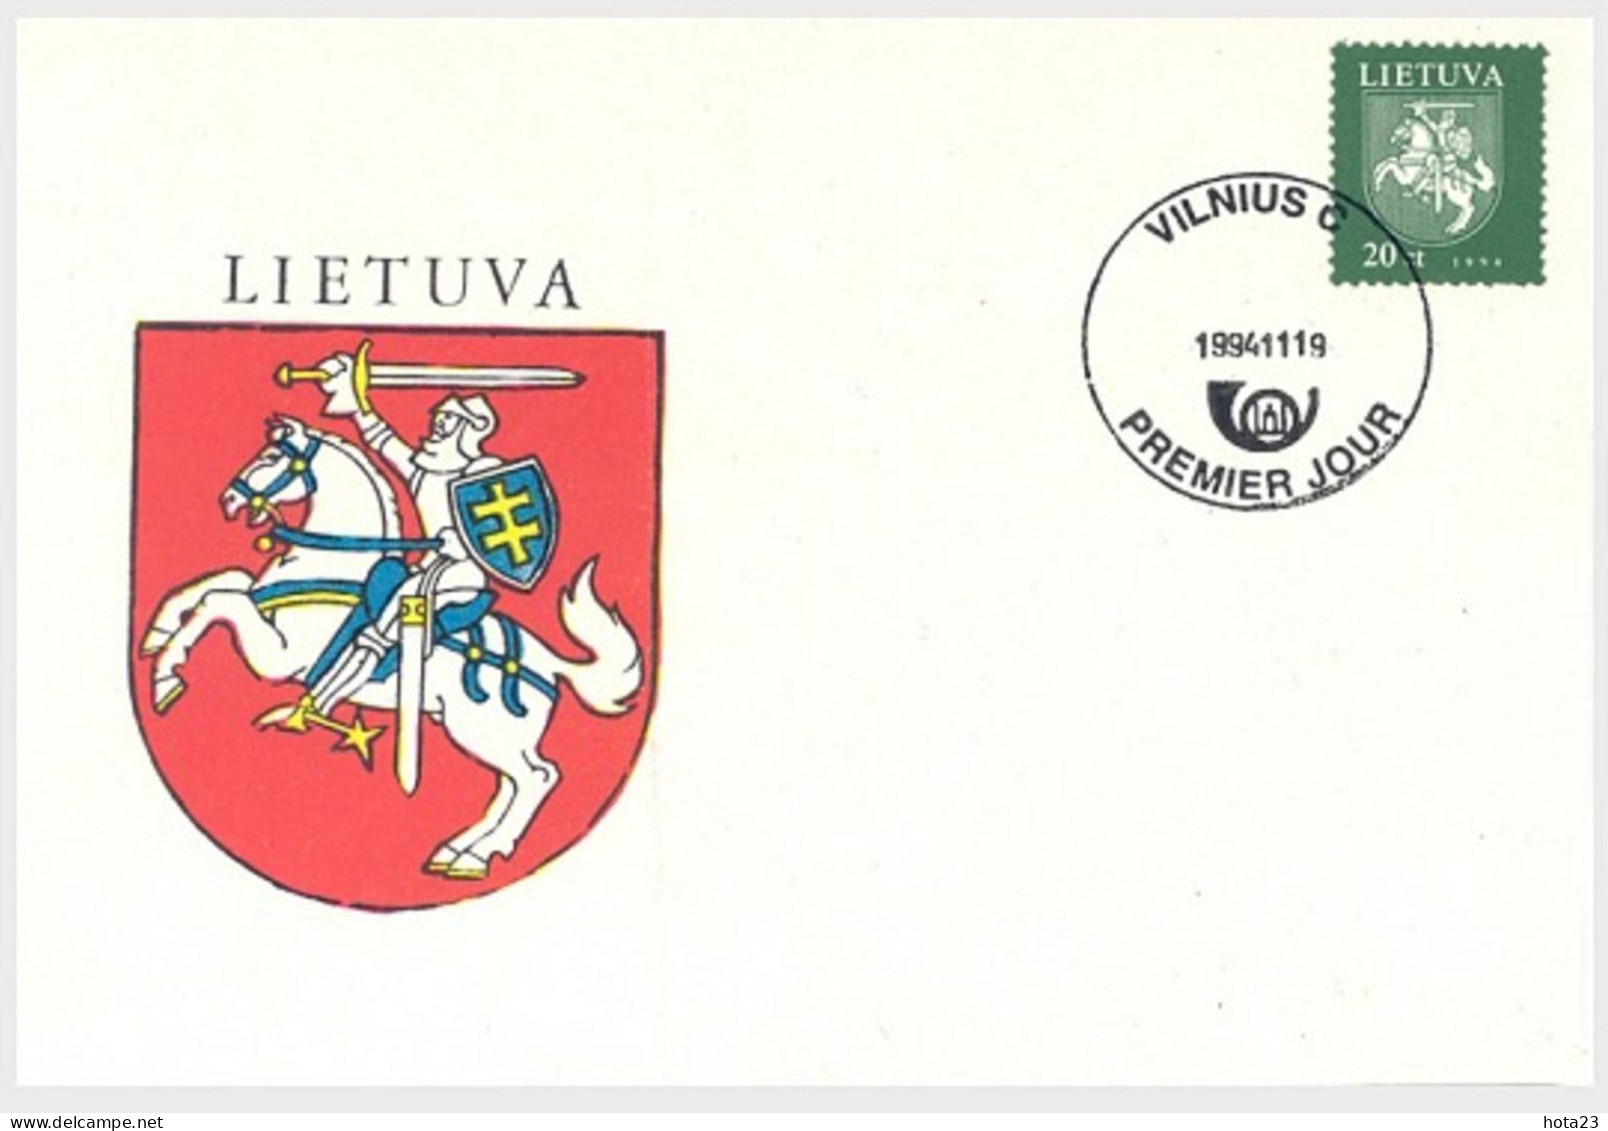 (!) LITHUANIA -MI 571 - Coat Of Arms 1994 Horseman Stamp 20 Ct - FDC - Lithuania